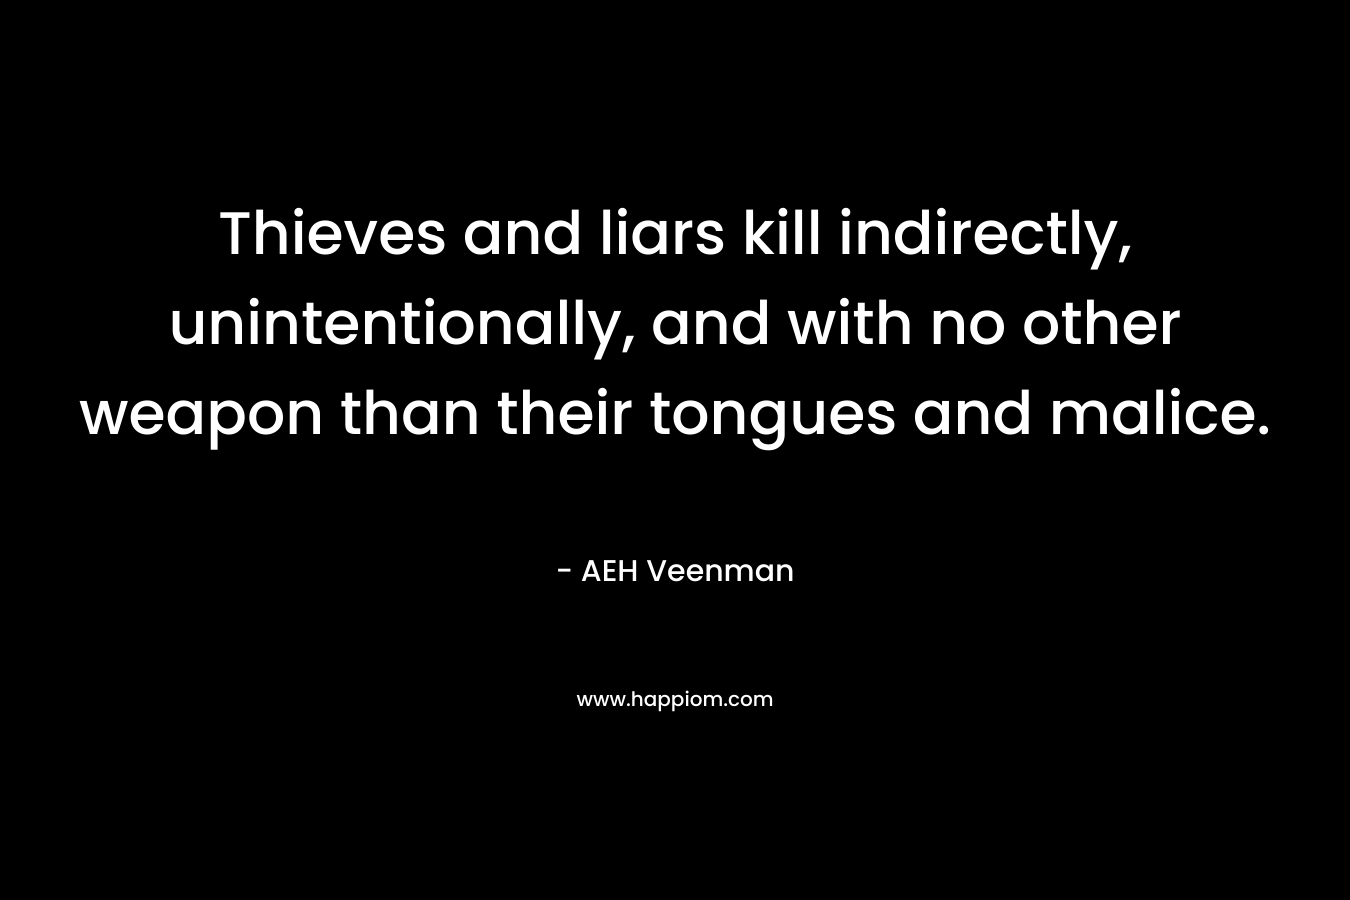 Thieves and liars kill indirectly, unintentionally, and with no other weapon than their tongues and malice.